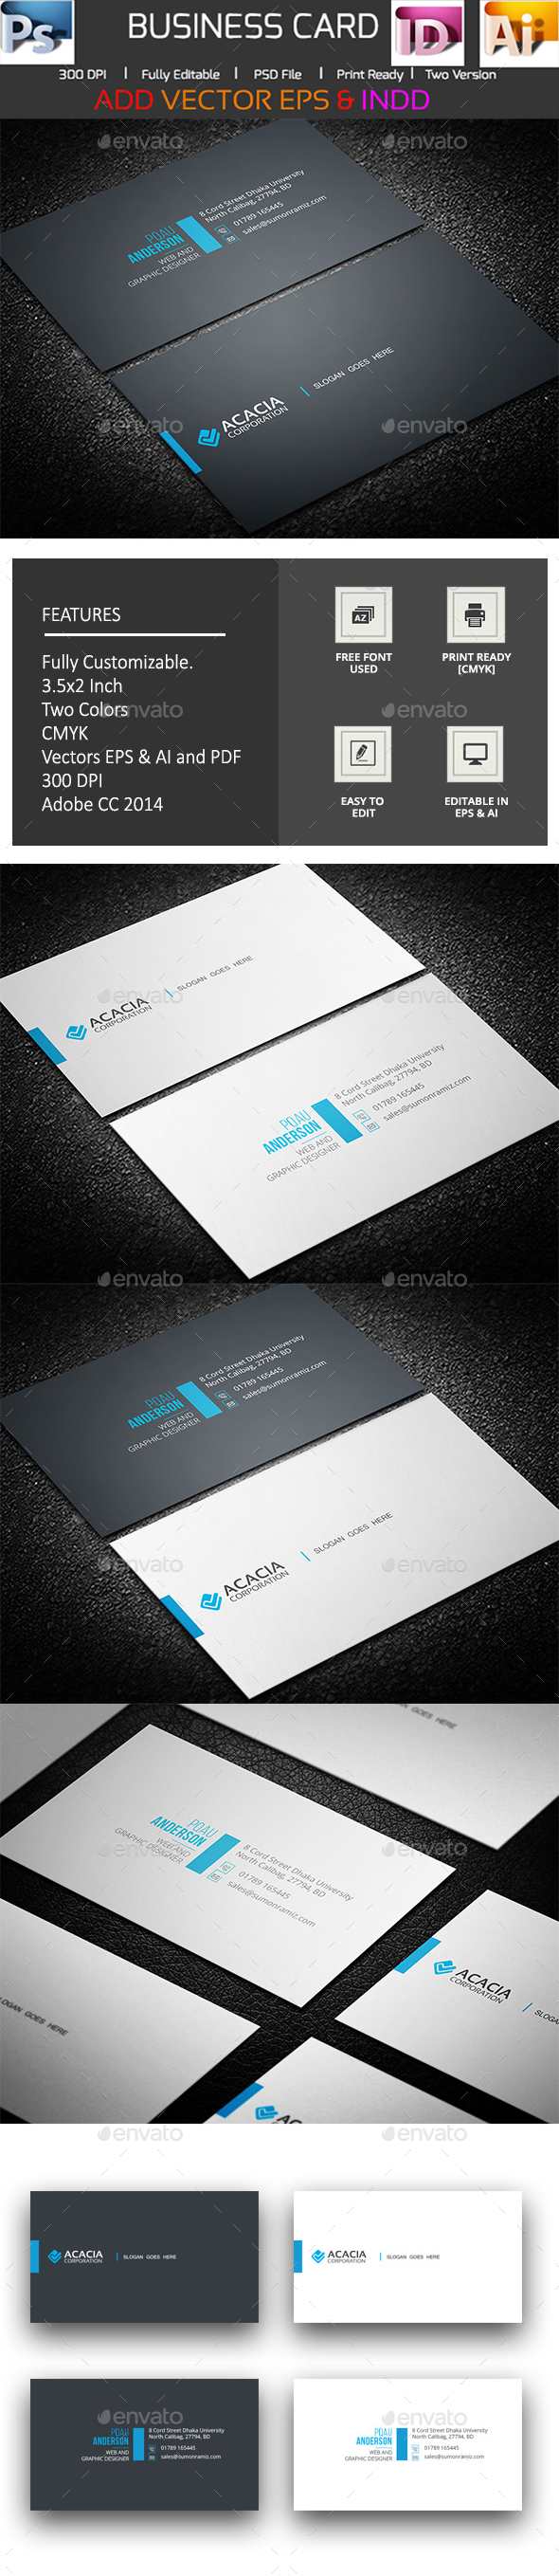 business card indesign template free download